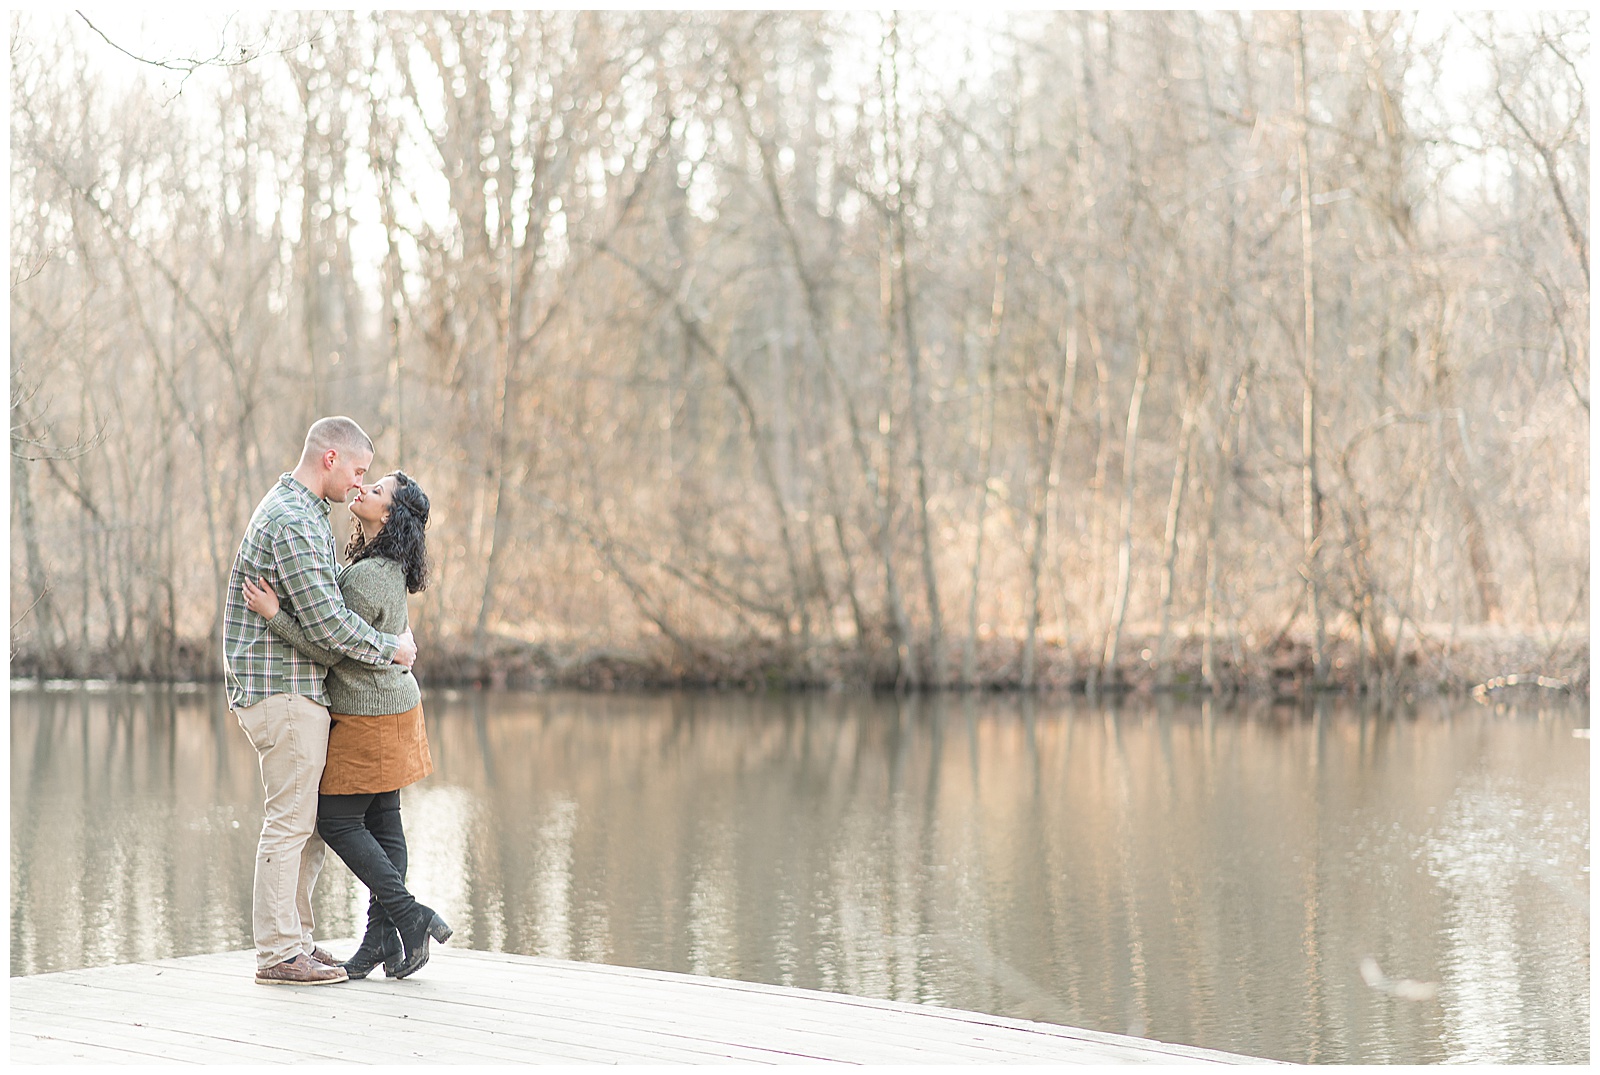 couple wrapped up in each other's arms on a wood dock